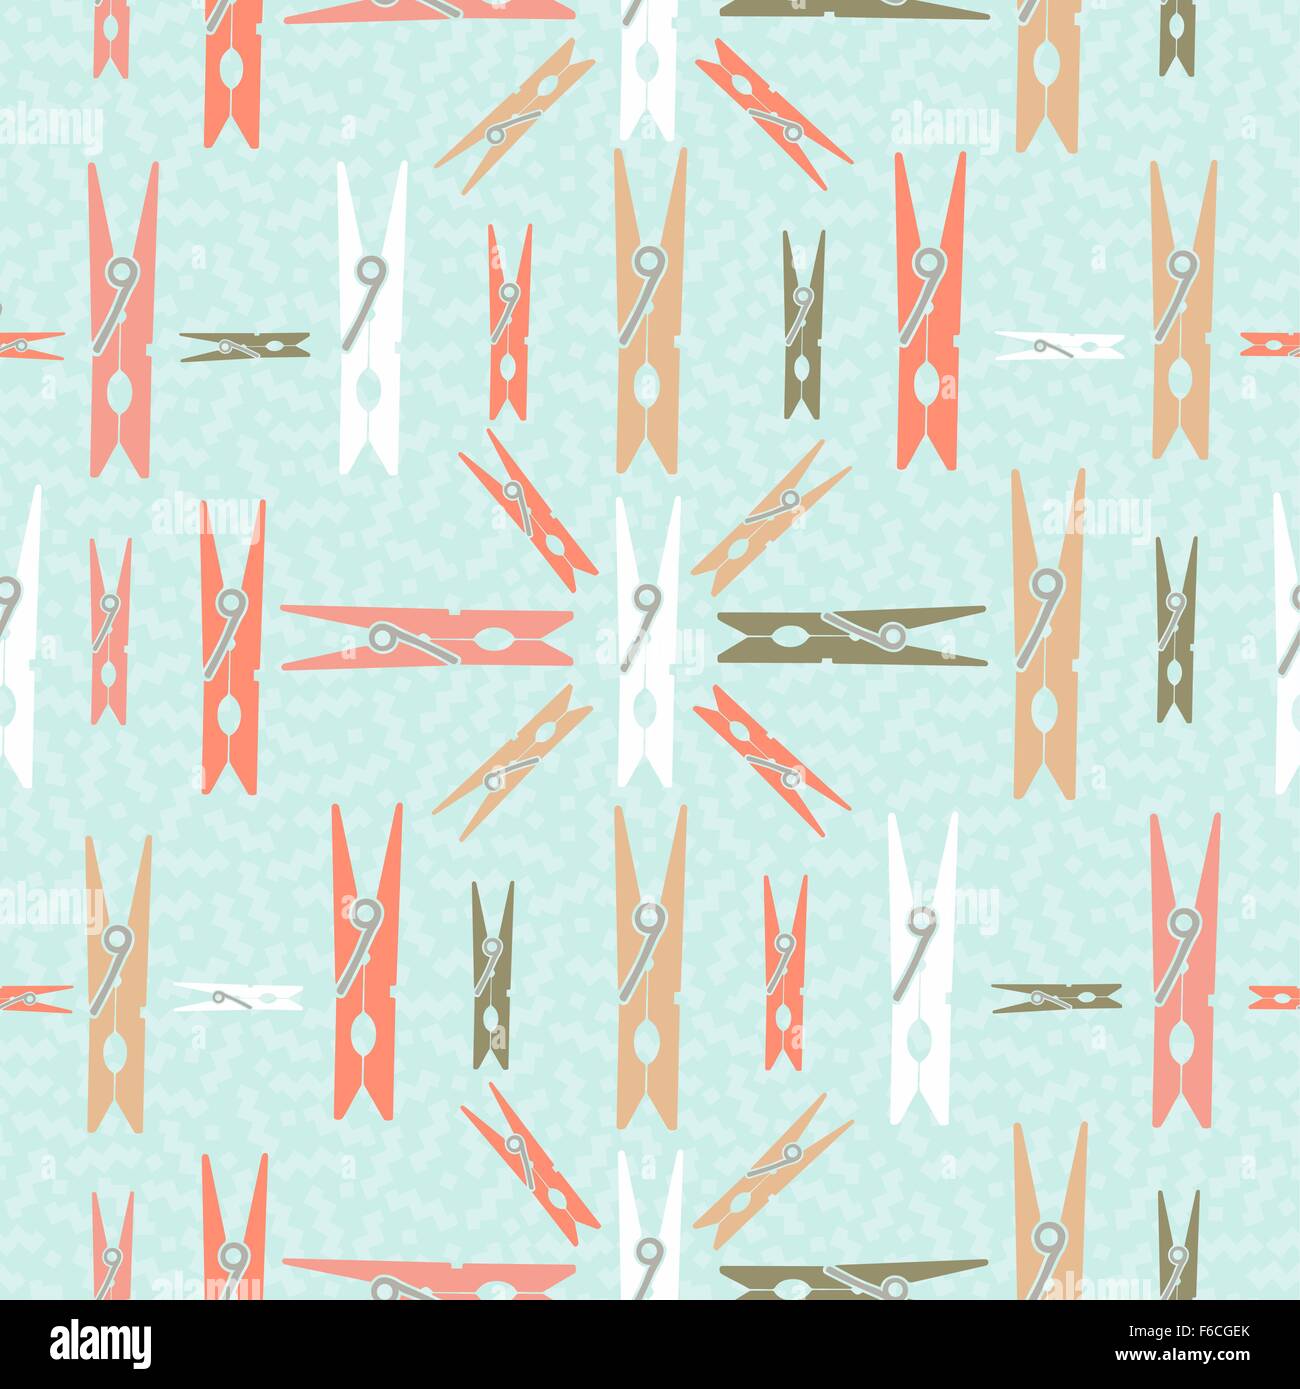 Clothespin design retro seamless pattern concept background. Ideal for web backdrop, print or vintage style campaign. EPS10 Stock Vector